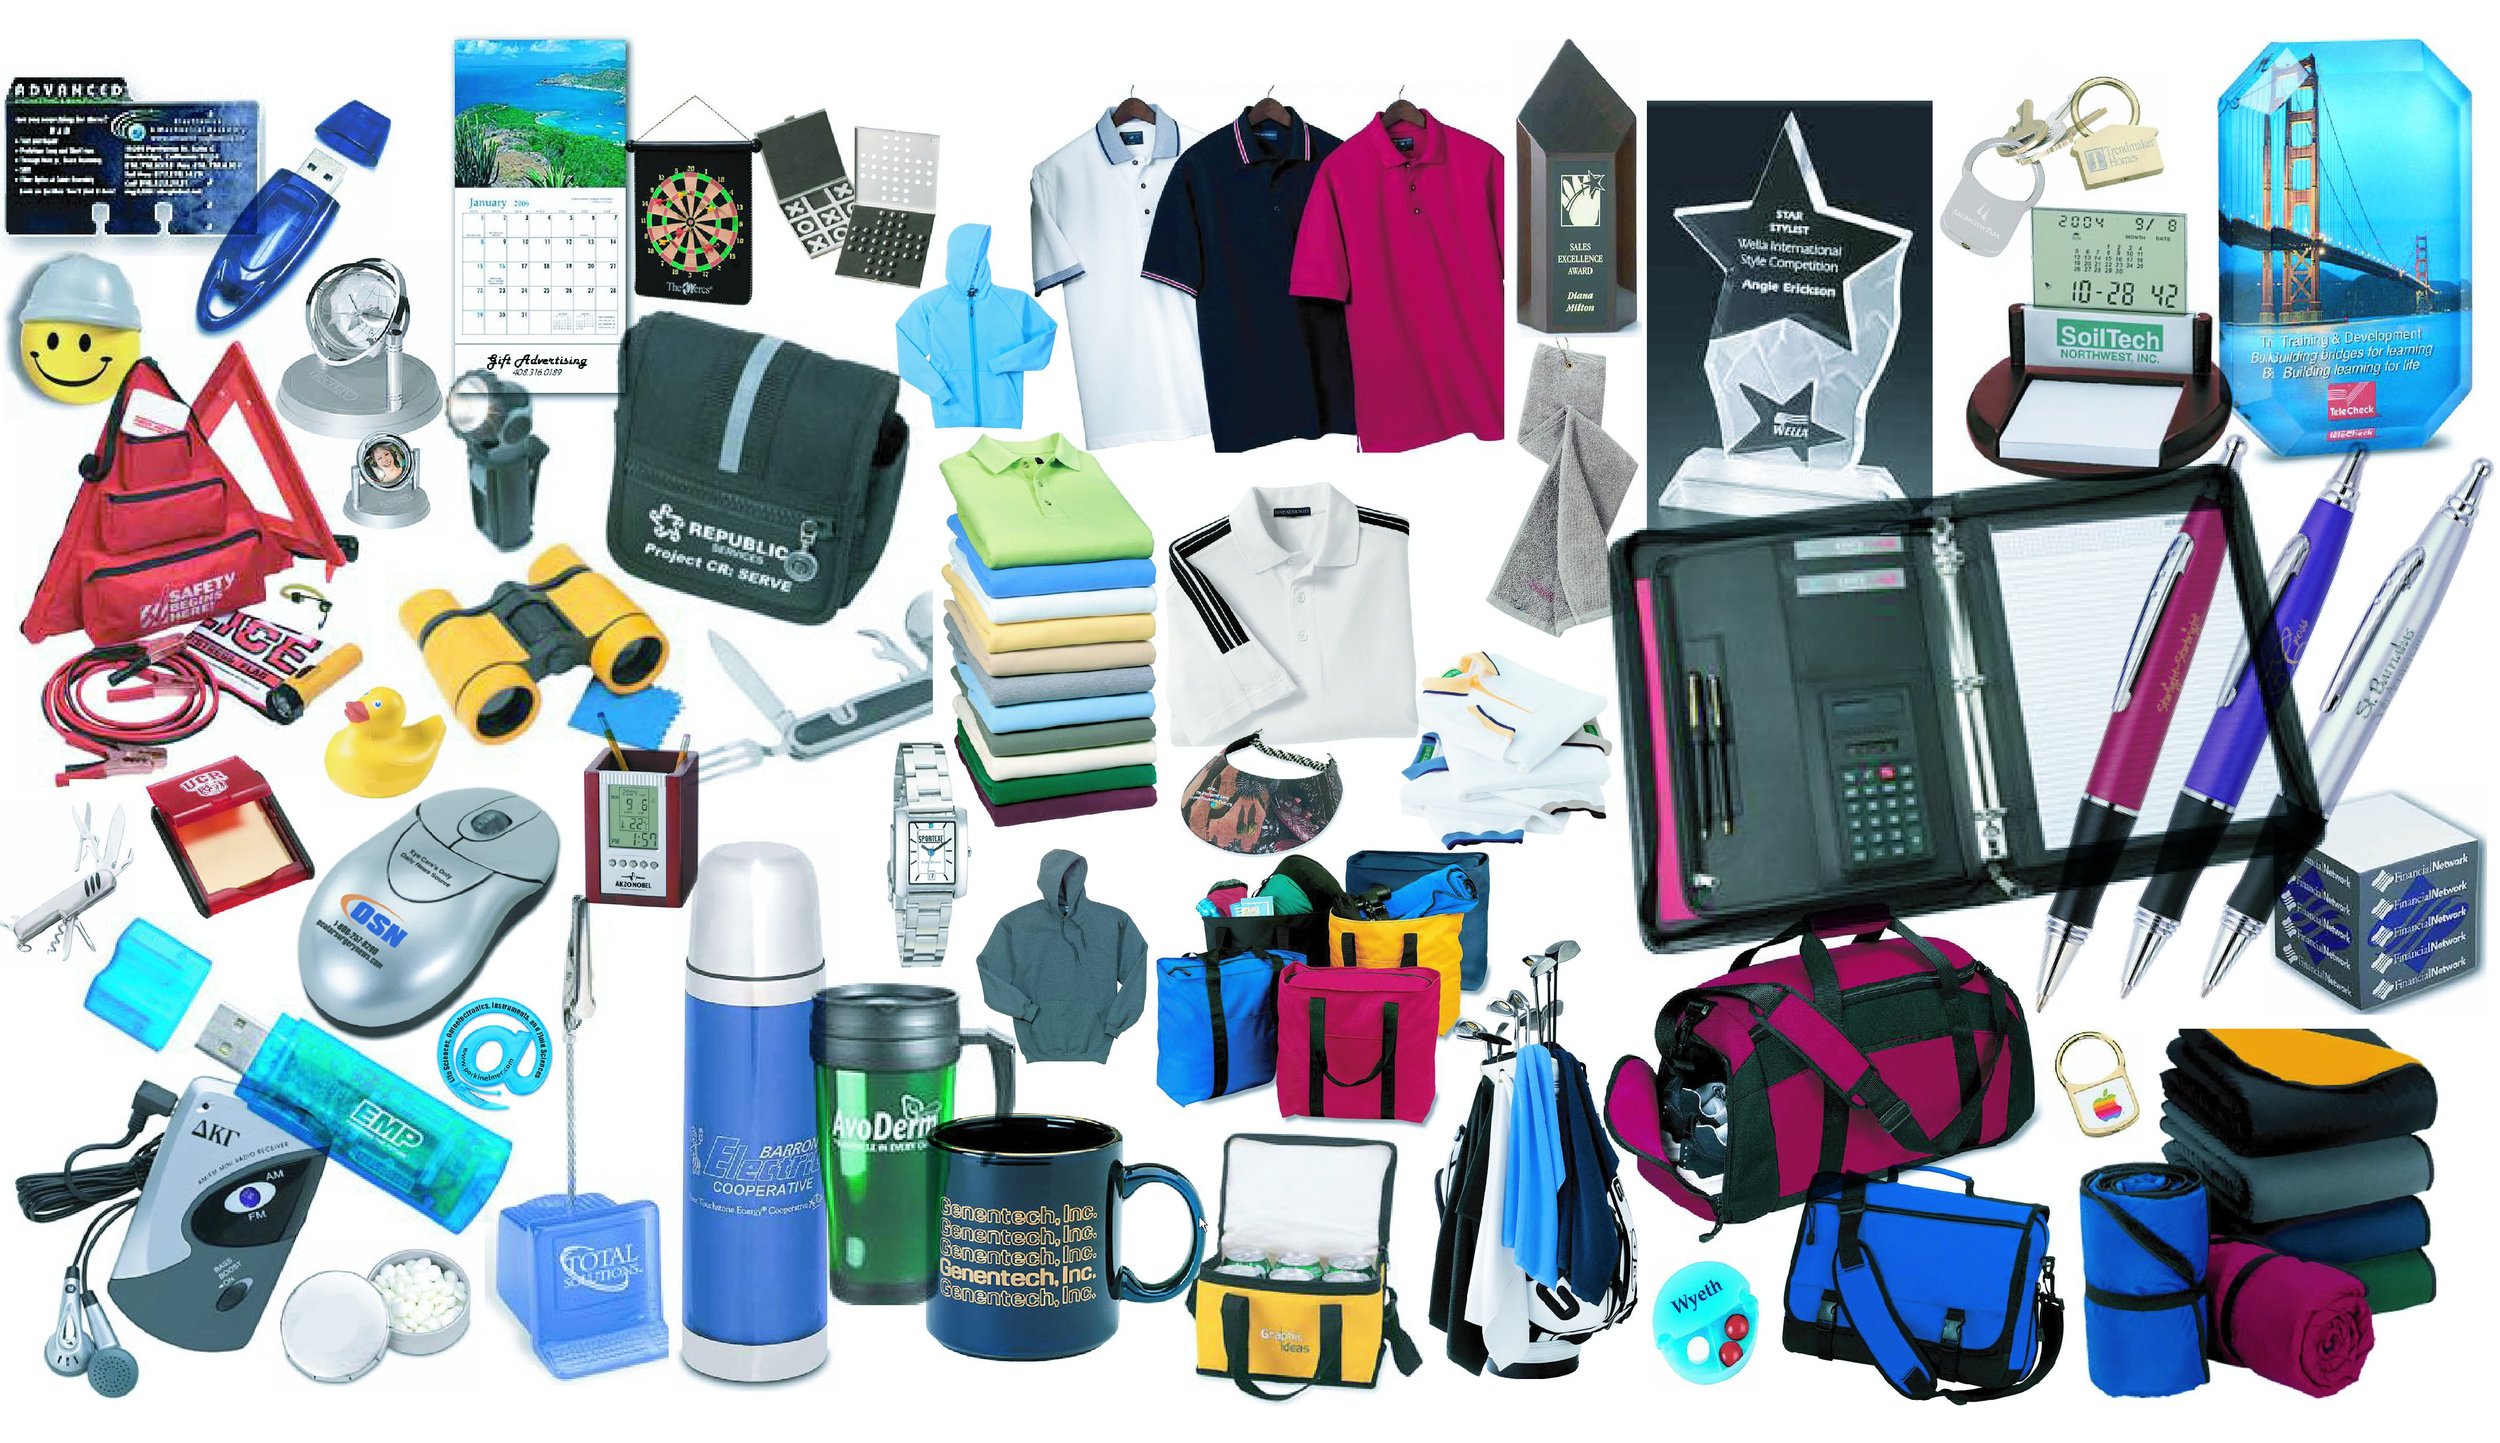 Image-promotional-products-branding2.jpg